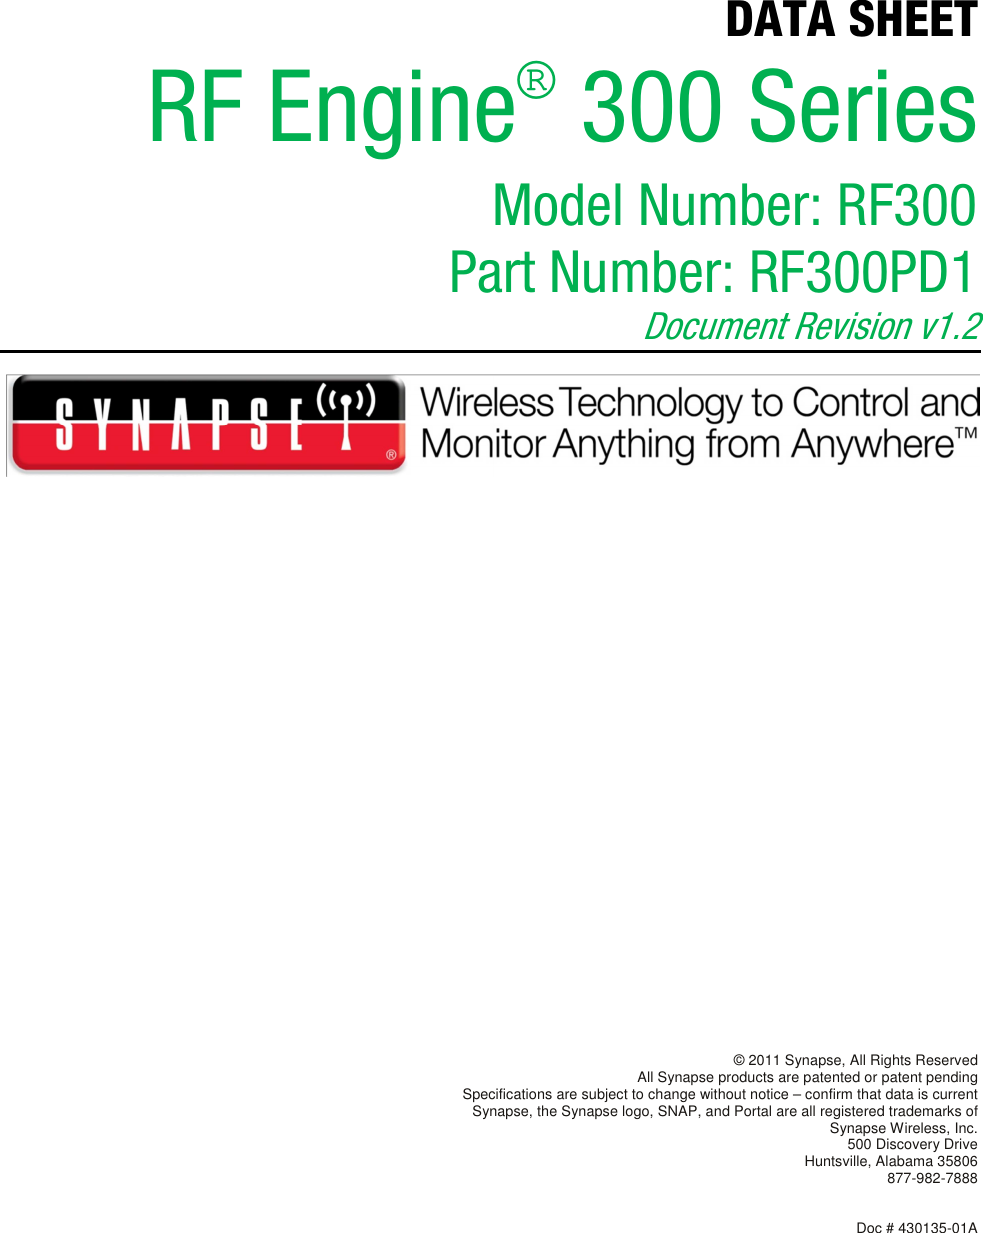   DATA SHEET RF Engine® 300 Series Model Number: RF300 Part Number: RF300PD1  Document Revision v1.2                 © 2011 Synapse, All Rights Reserved All Synapse products are patented or patent pending Specifications are subject to change without notice – confirm that data is current Synapse, the Synapse logo, SNAP, and Portal are all registered trademarks of Synapse Wireless, Inc. 500 Discovery Drive Huntsville, Alabama 35806 877-982-7888   Doc # 430135-01A   